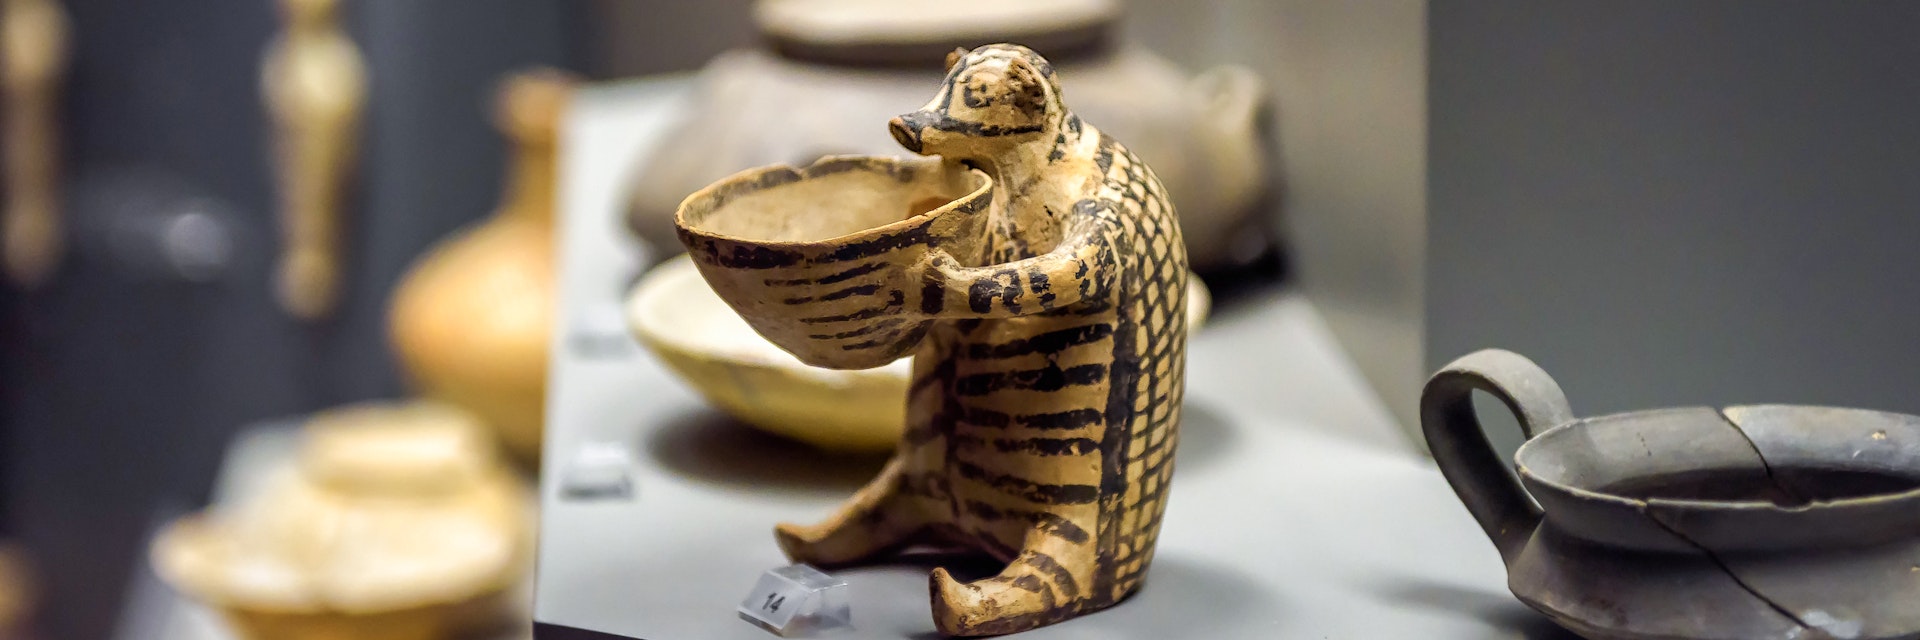 Ceramic vase like hedgehog in National Archaeological Museum, Athens, Greece. Remains of famous Ancient Greek culture. Old artifact,  historical dishes, crockery and pottery.  Athens - May 7, 2018; Shutterstock ID 1522798868; your: Erin Lenczycki; gl: 65050; netsuite: digital; full: poi
1522798868
amphora, ancient, animal, antique, antiquity, archaeological, archeology, art, artifact, athens, civilization, clay, crock, crockery, culture, dish, europe, exhibition, exposition, famous, fix, greece, greek, hedgehog, hellenistic, historical, history, indoor, jar, landmark, museum, mycenae, mykines, national, old, ornate, peloponnese, pitcher, pot, pottery, roman, showcase, sightseeing, tableware, tourism, tourist, travel, vase, ware, zoomorphic